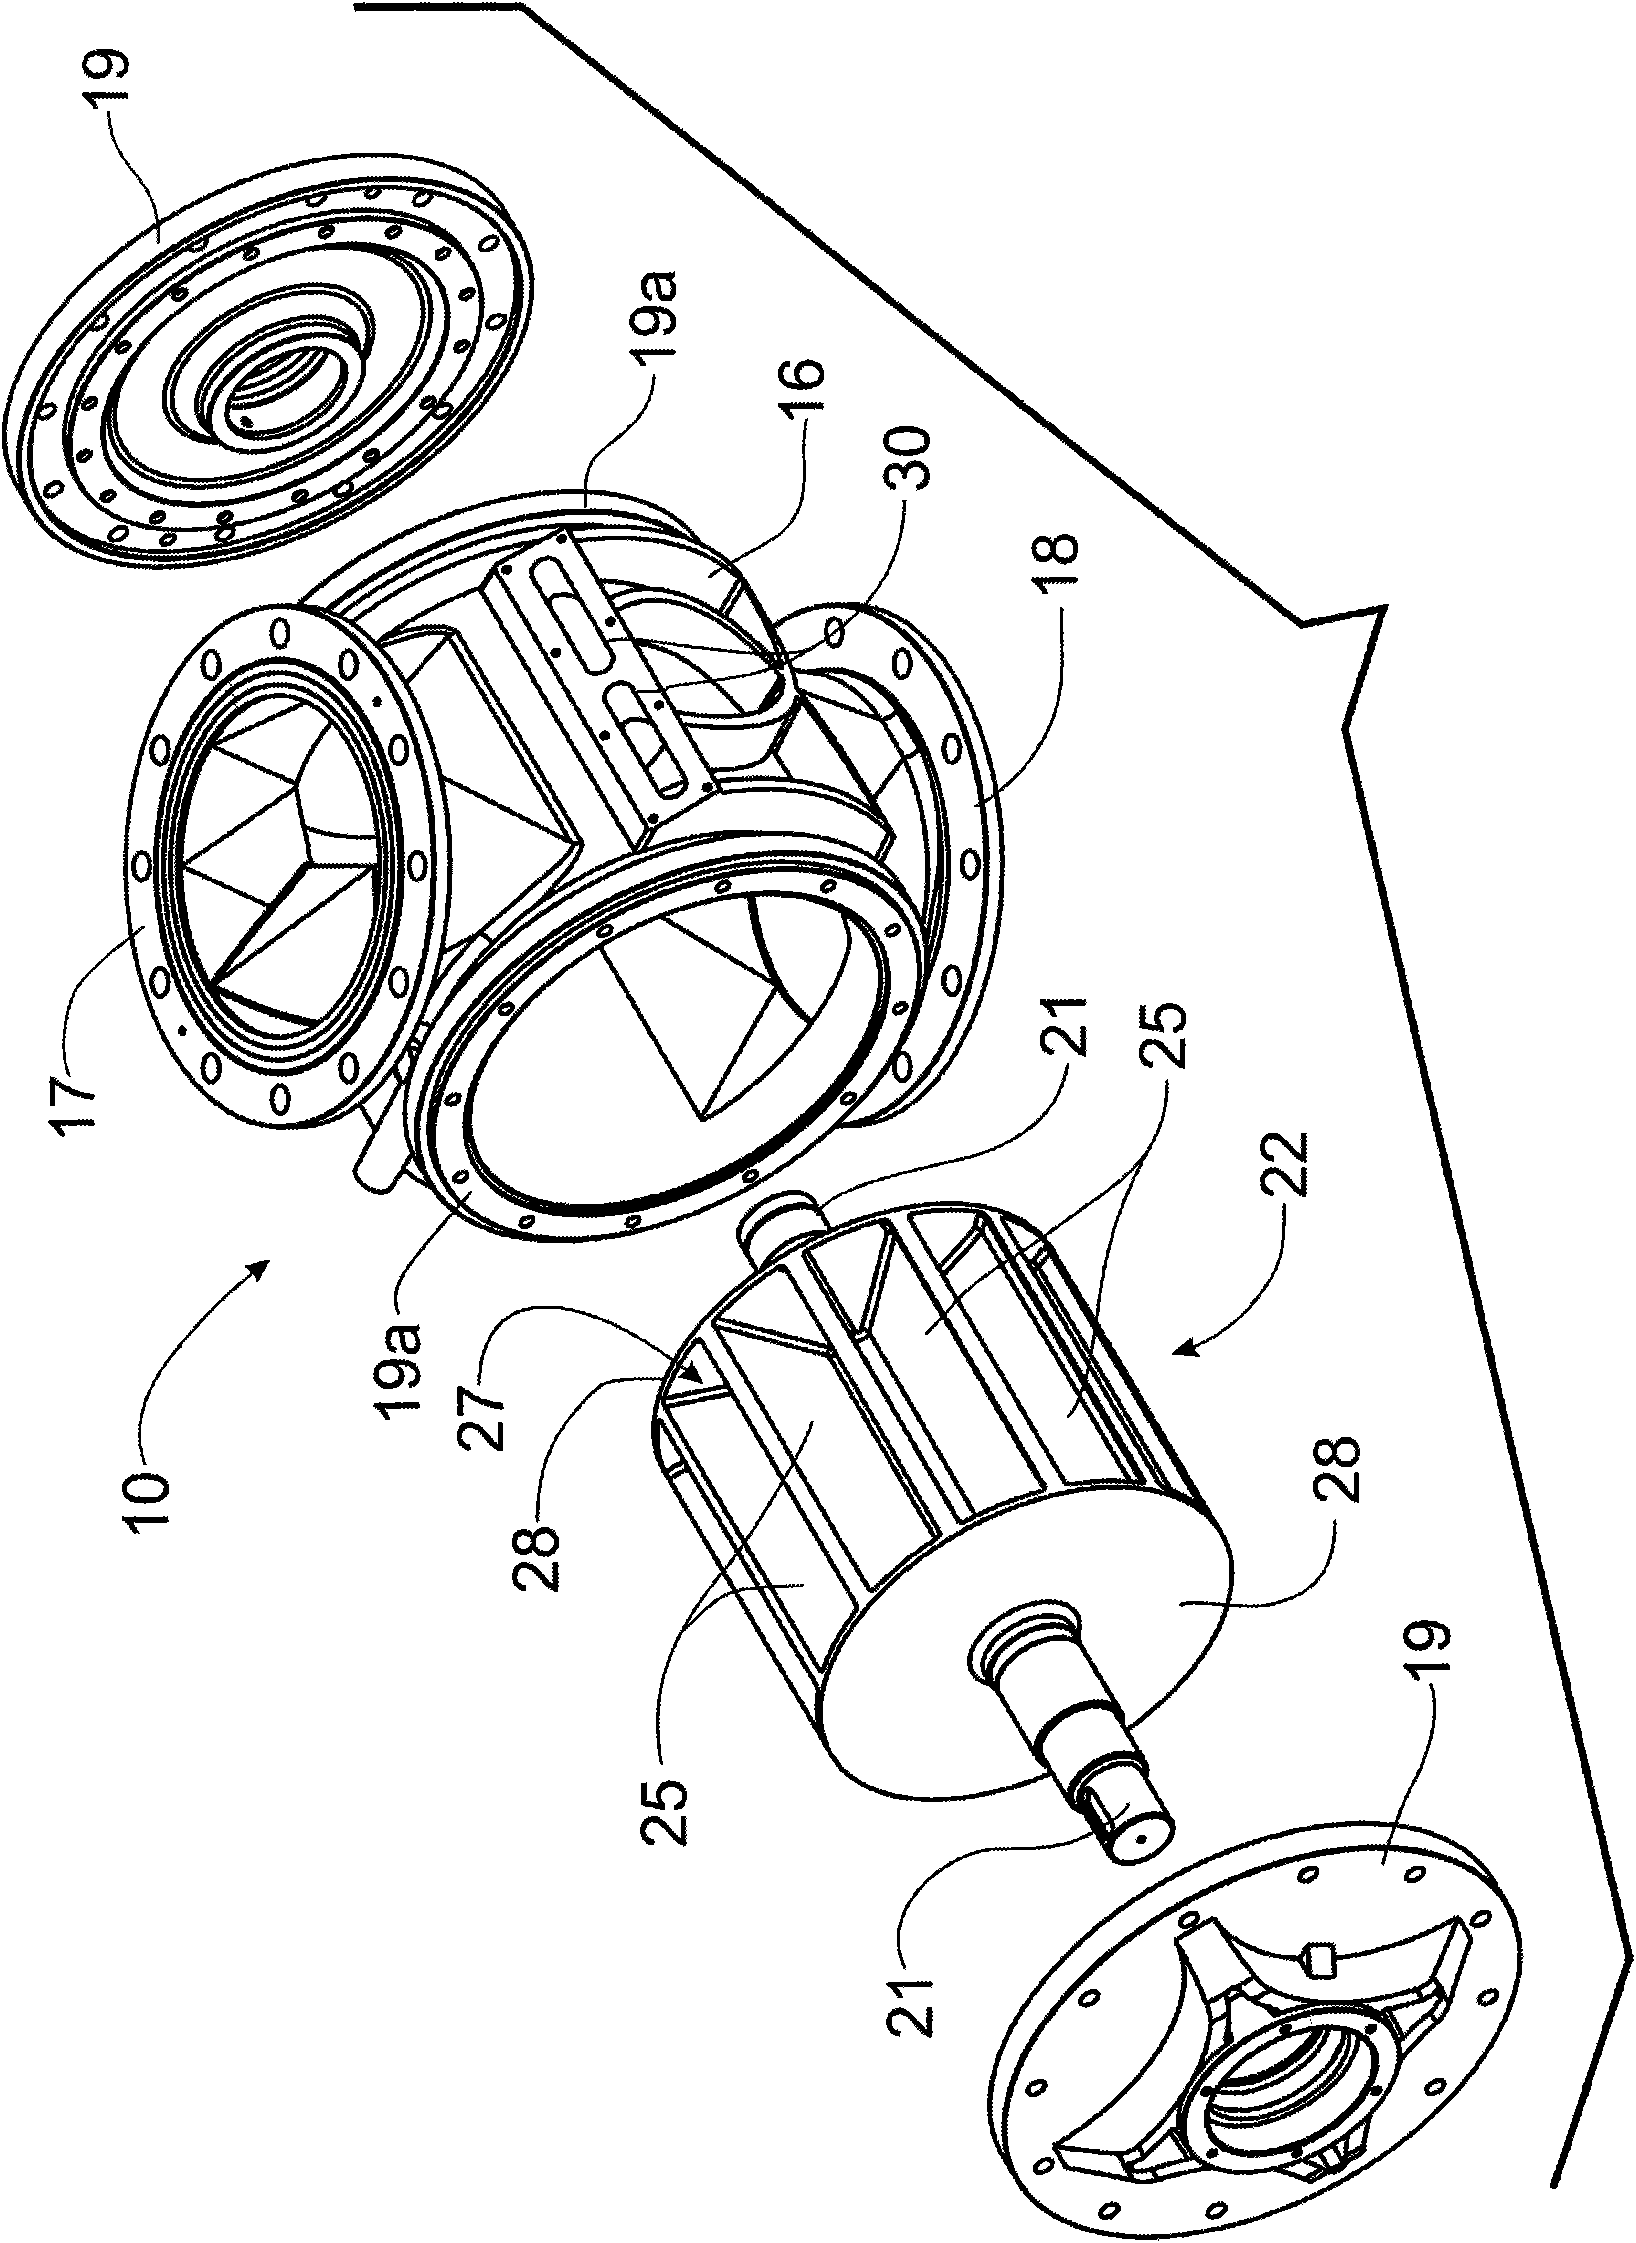 Rotor configuration for a rotary valve